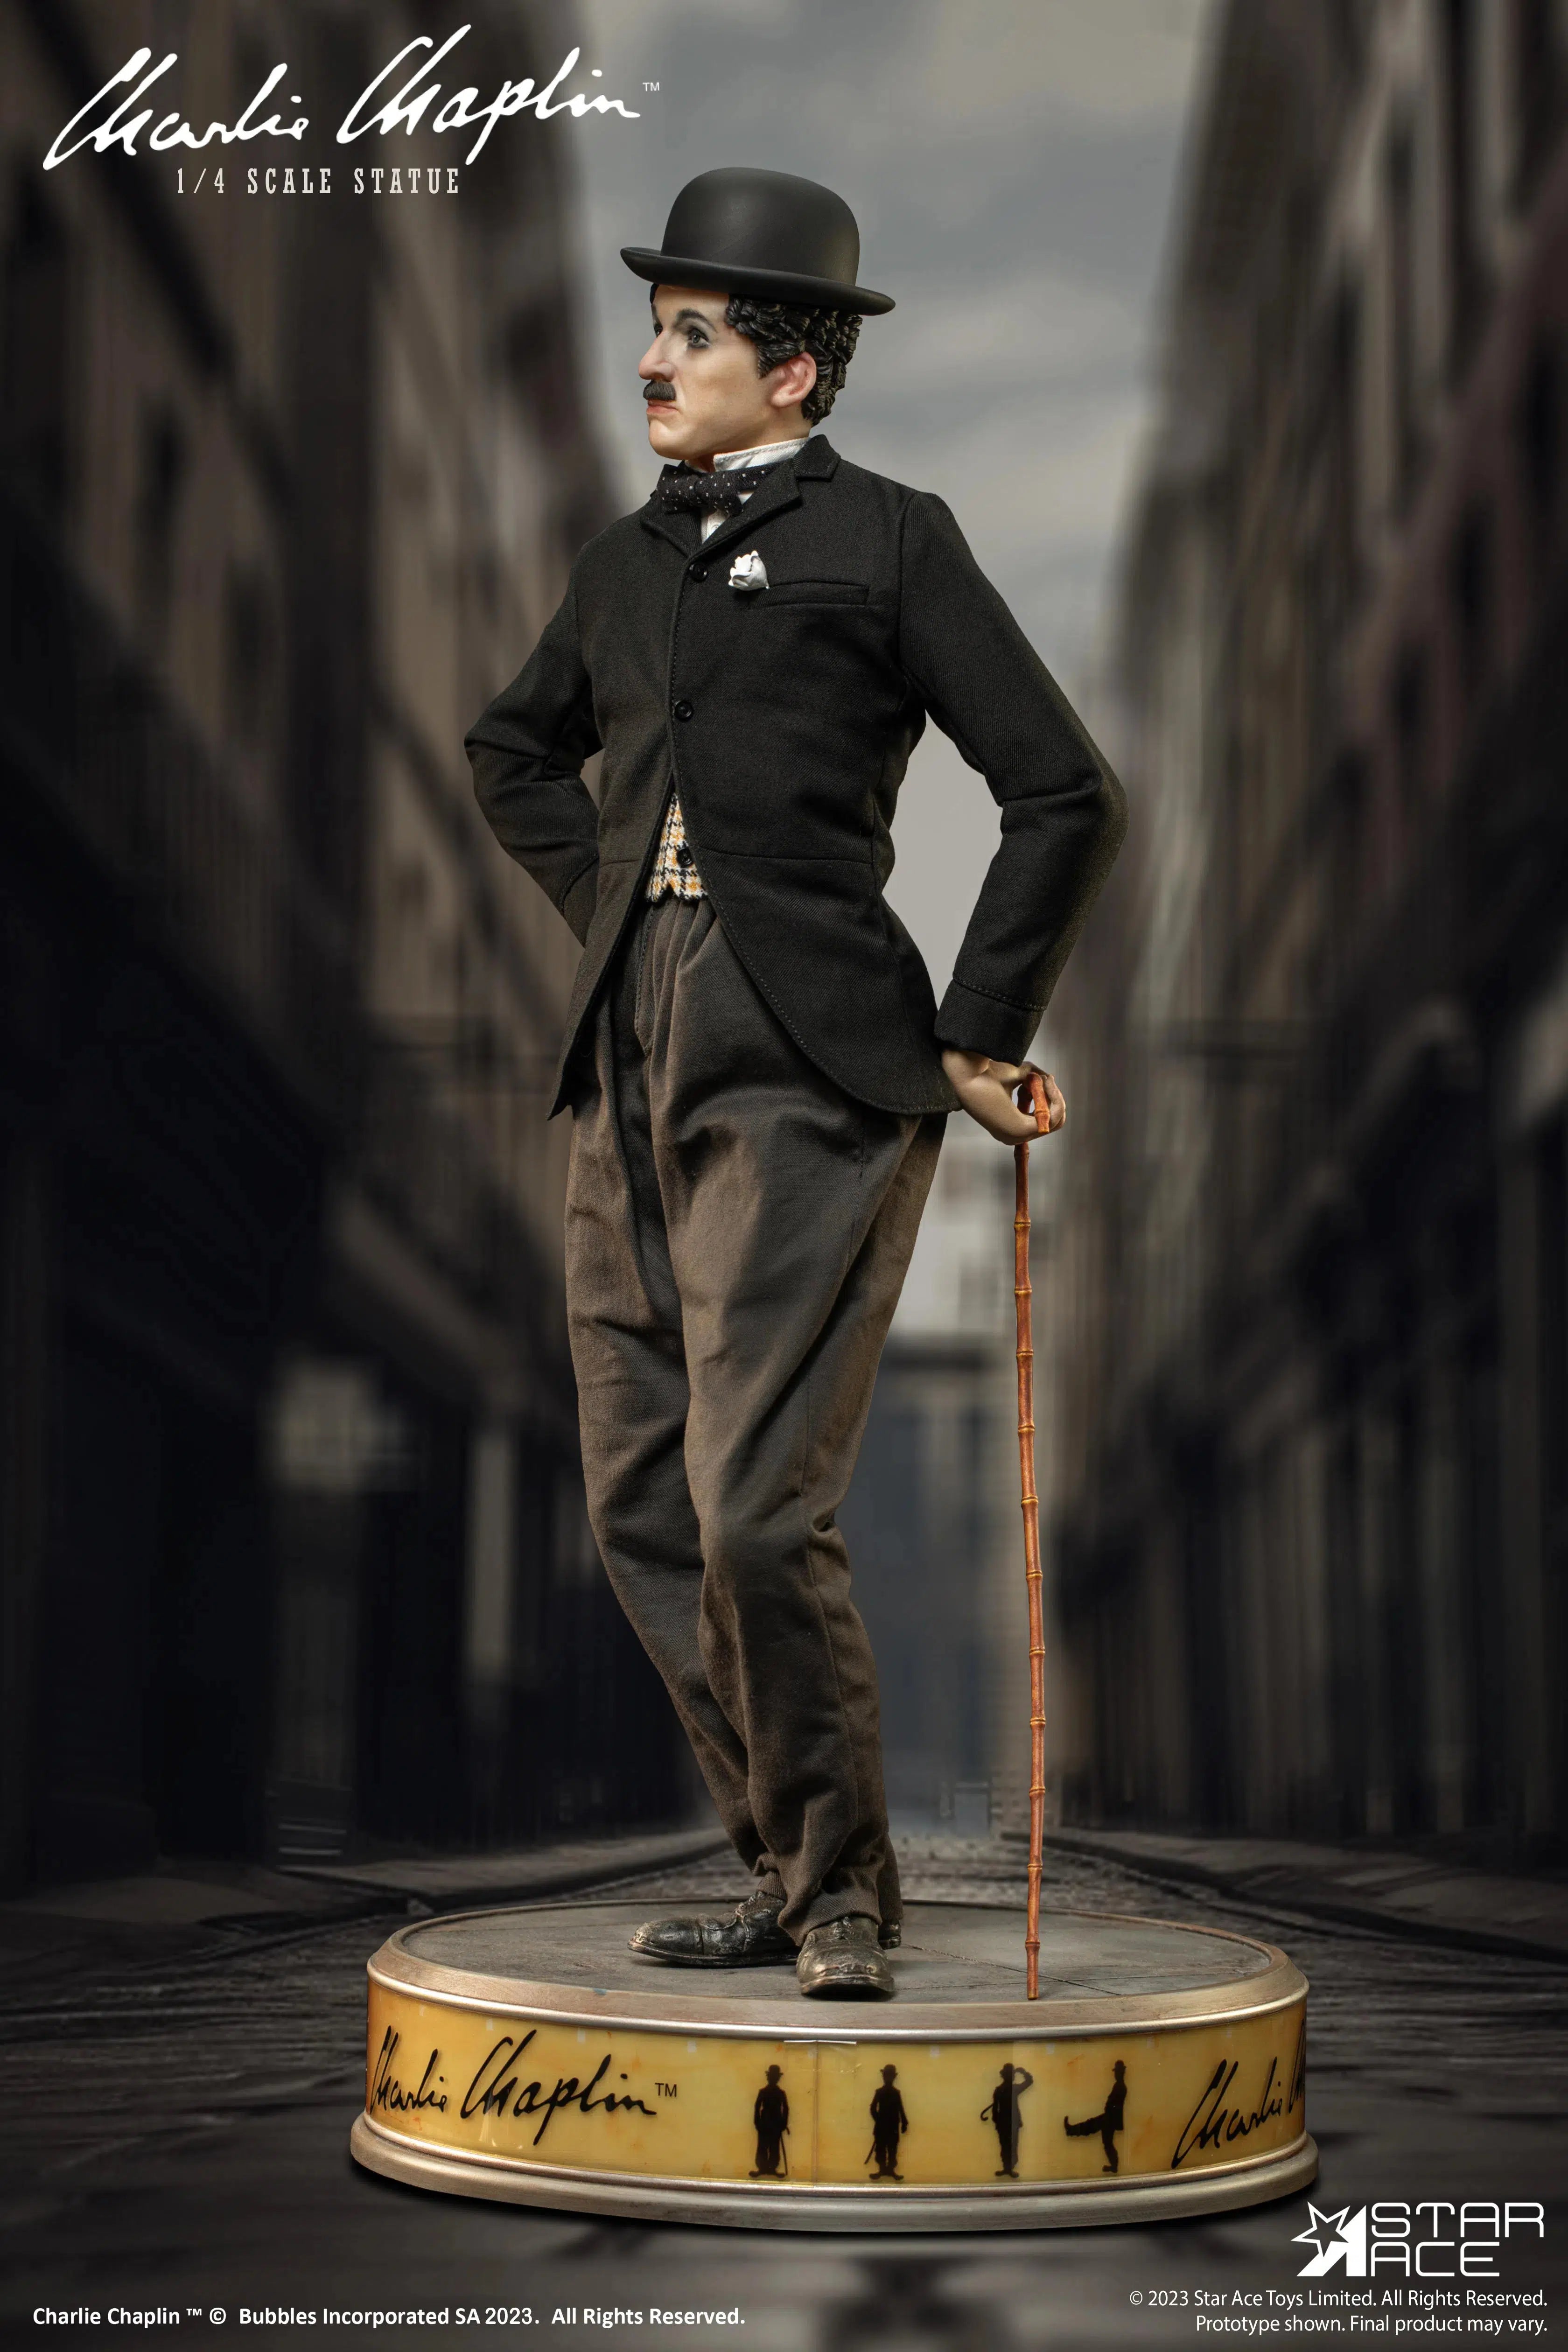 Charlie Chaplin: Normal Version: Movie Icon: 1/4 Scale Statue: Star Ace